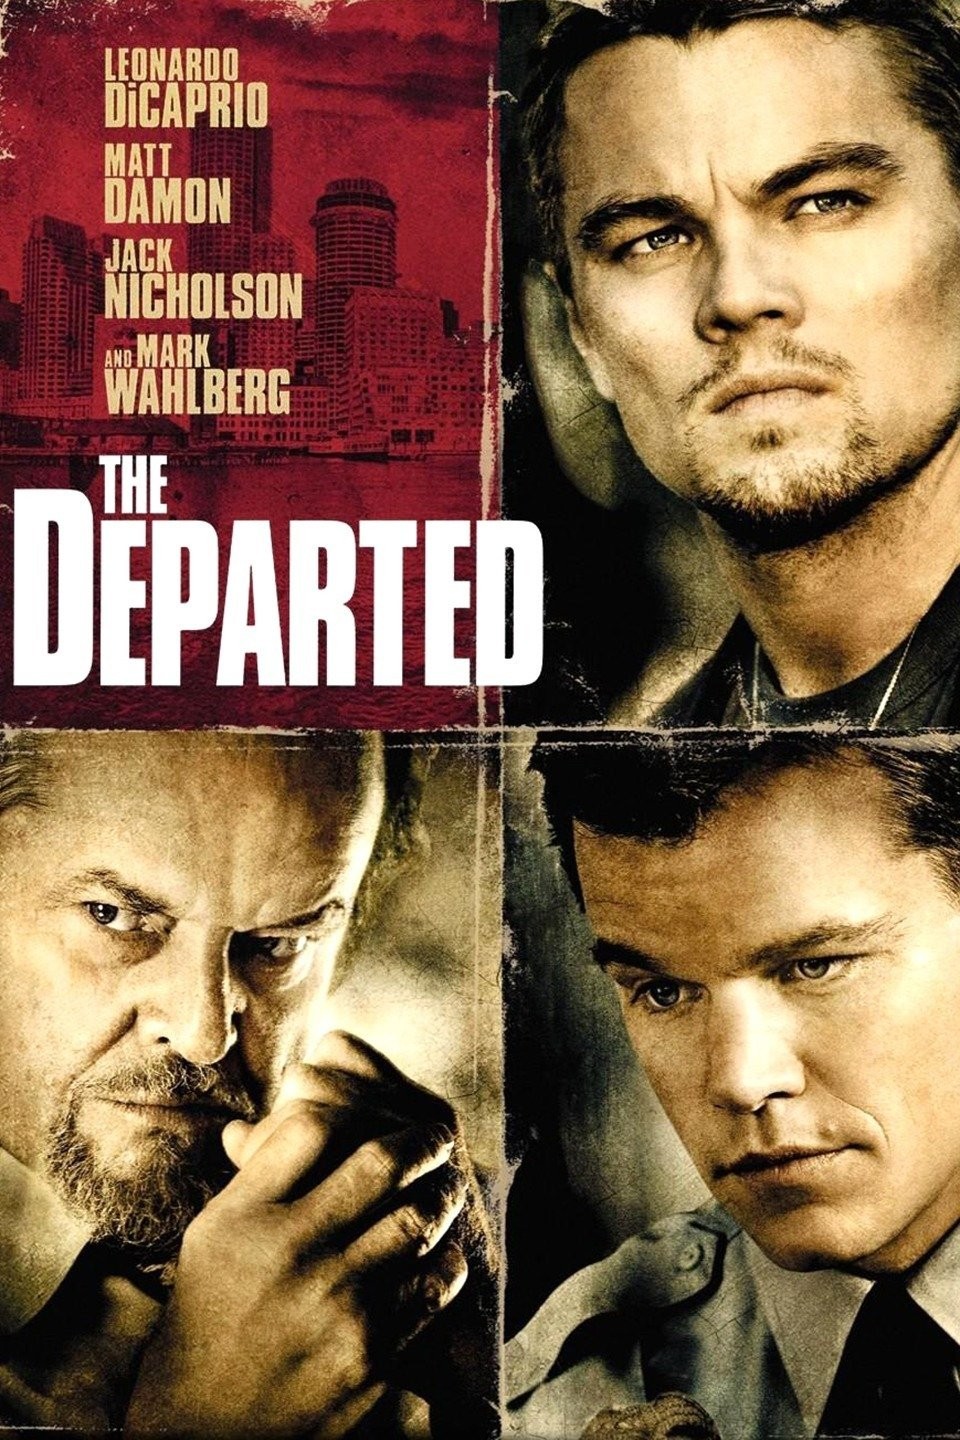 The Departed - Rotten Tomatoes